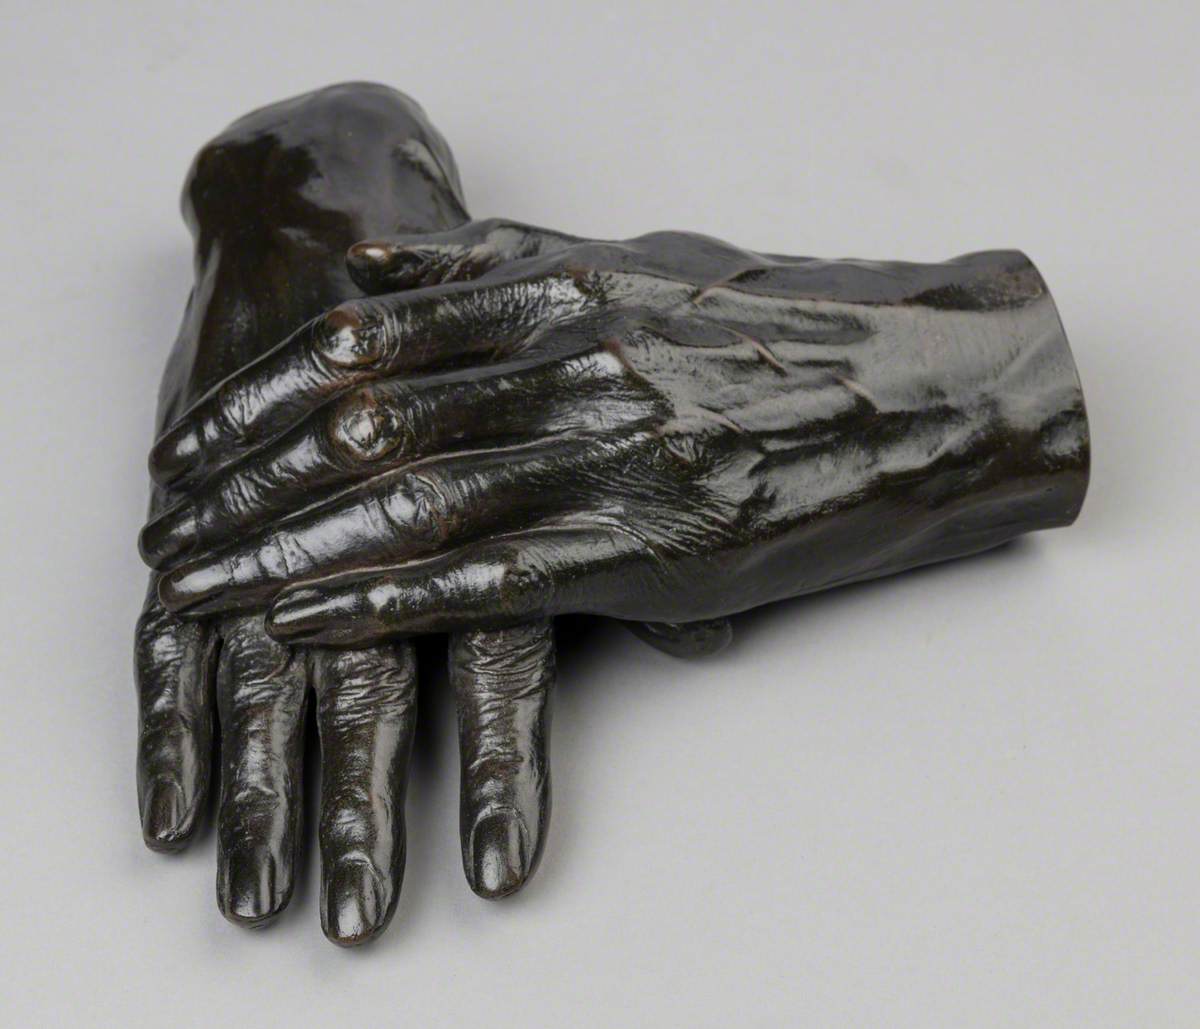 Hands of Thomas Carlyle (1795–1881)